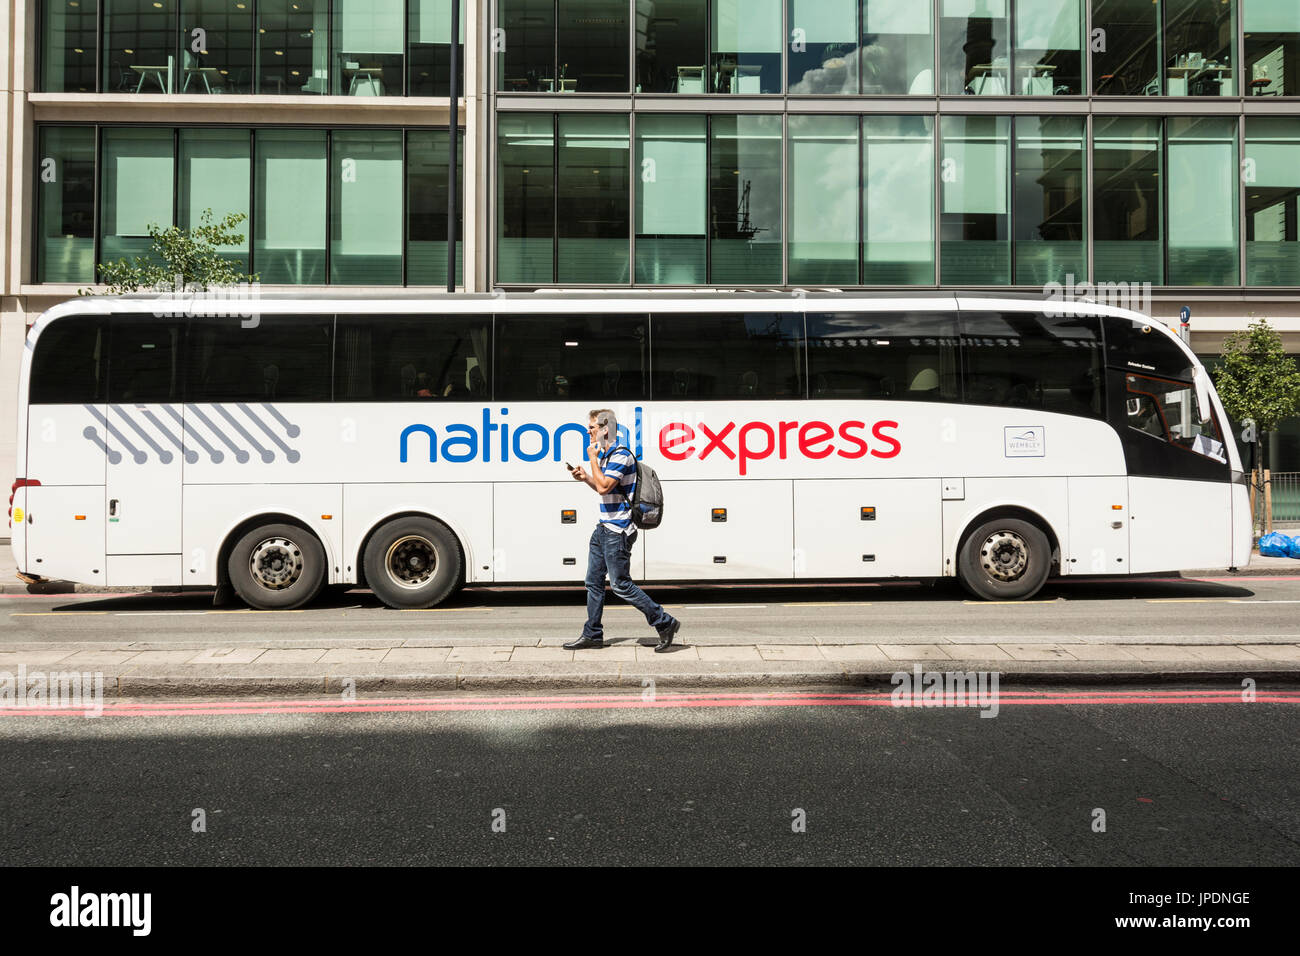 A National Express coach near Victoria Coach Station in London, UK Stock Photo